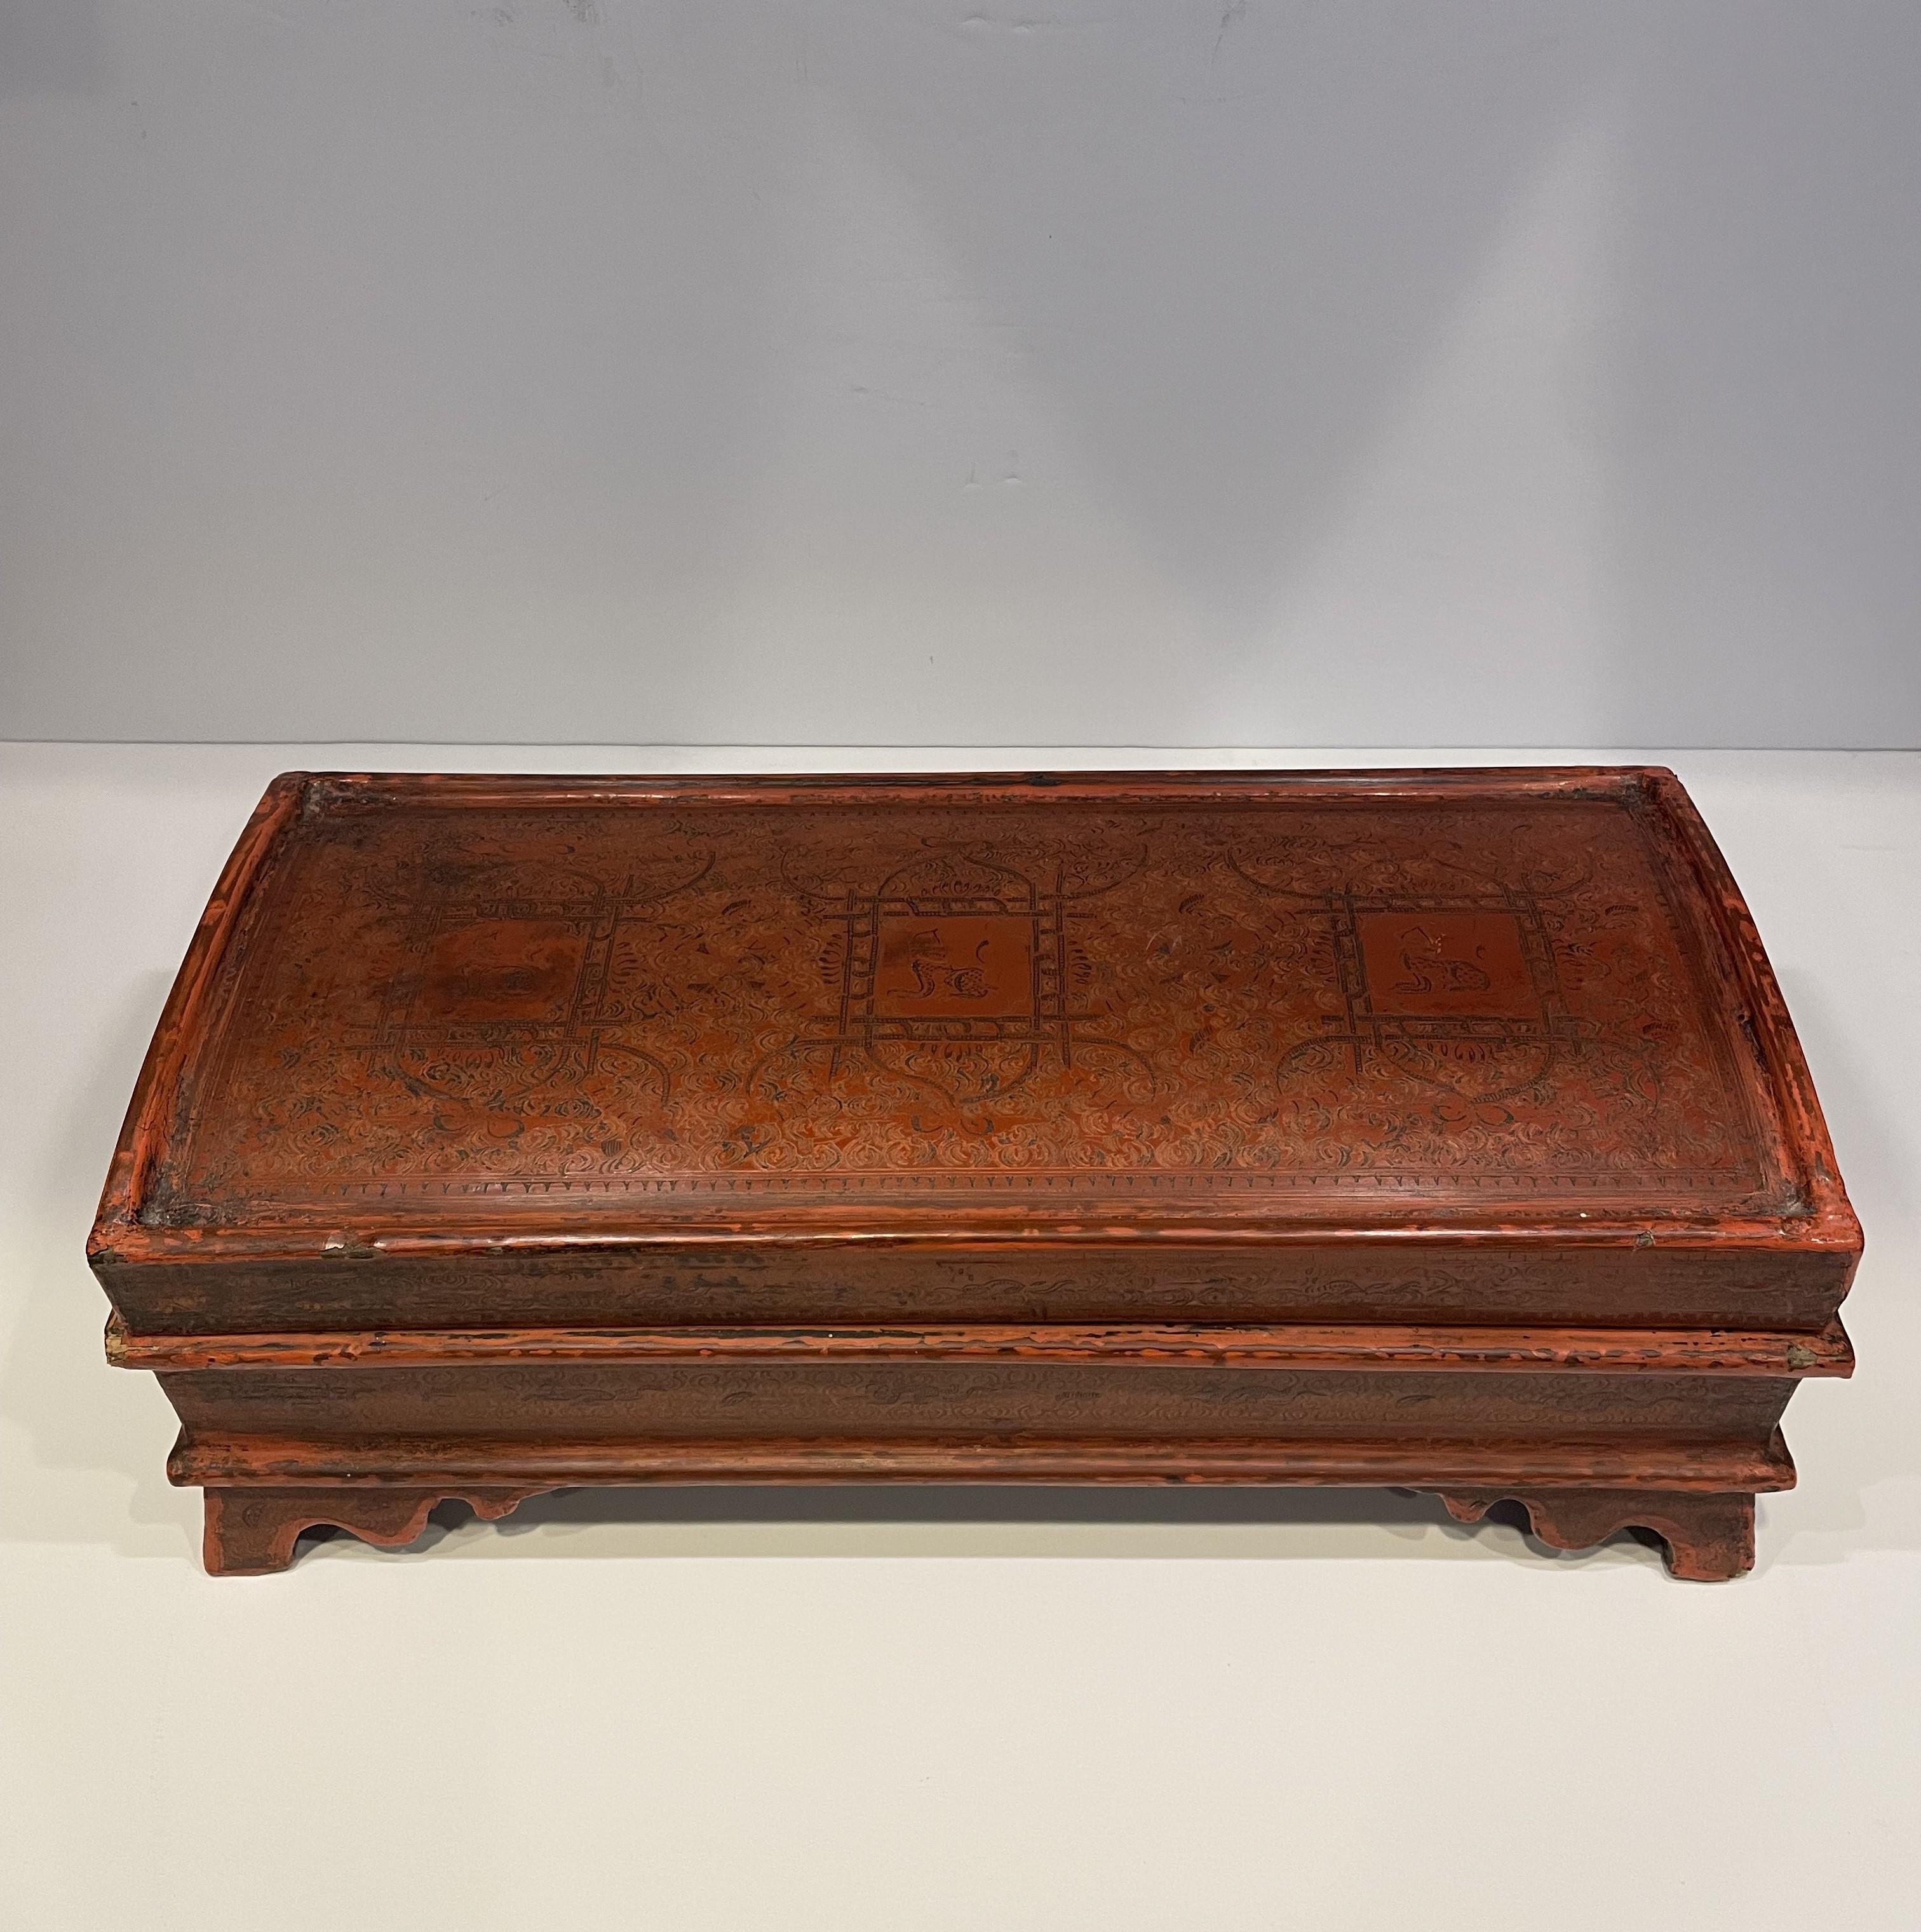 British Colonial Antique Indonesian Wood Lacquered Box For Sale